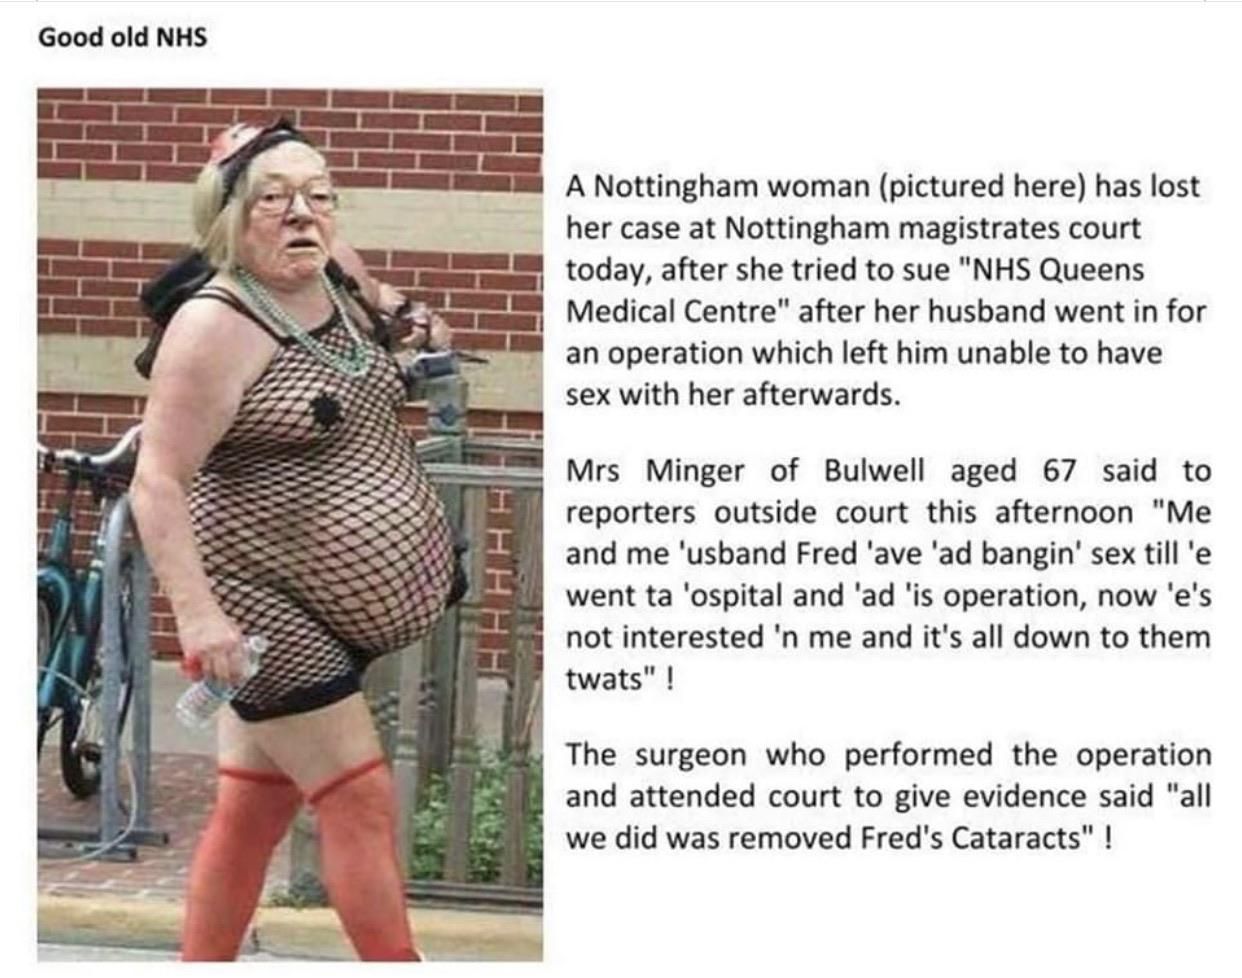 Banning elective surgeries might be ok sometimes...